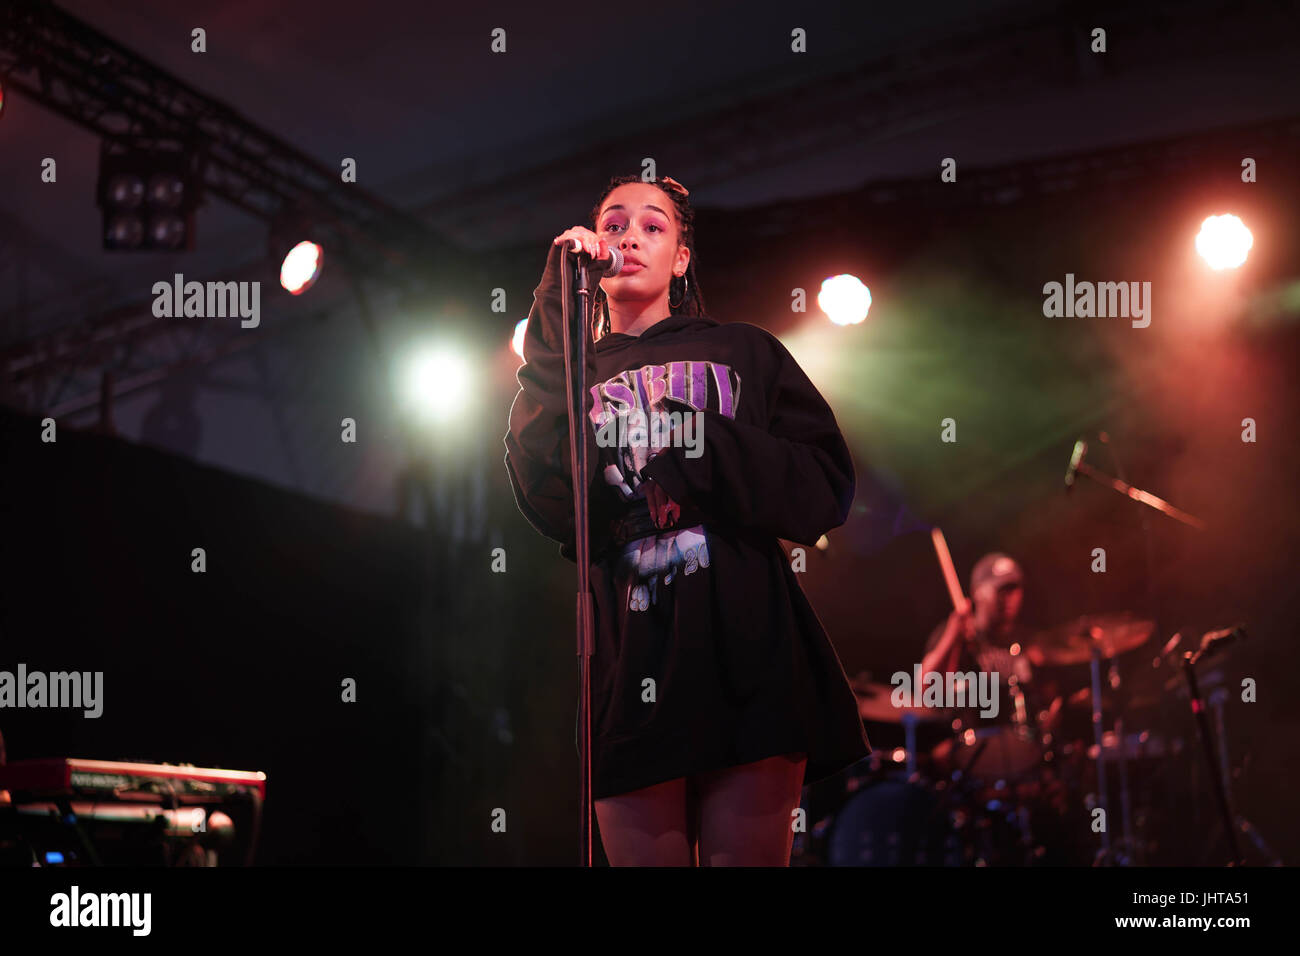 Latitude Festival, UK. 15th July, 2017. Jorja Smith performing live on the Lake stage at the 2017 Latitude festival in Henham Park, Southwold in Suffolk. Photo date: Saturday, July 15, 2017. Photo credit should read: Roger Garfield/Alamy Live News. Stock Photo